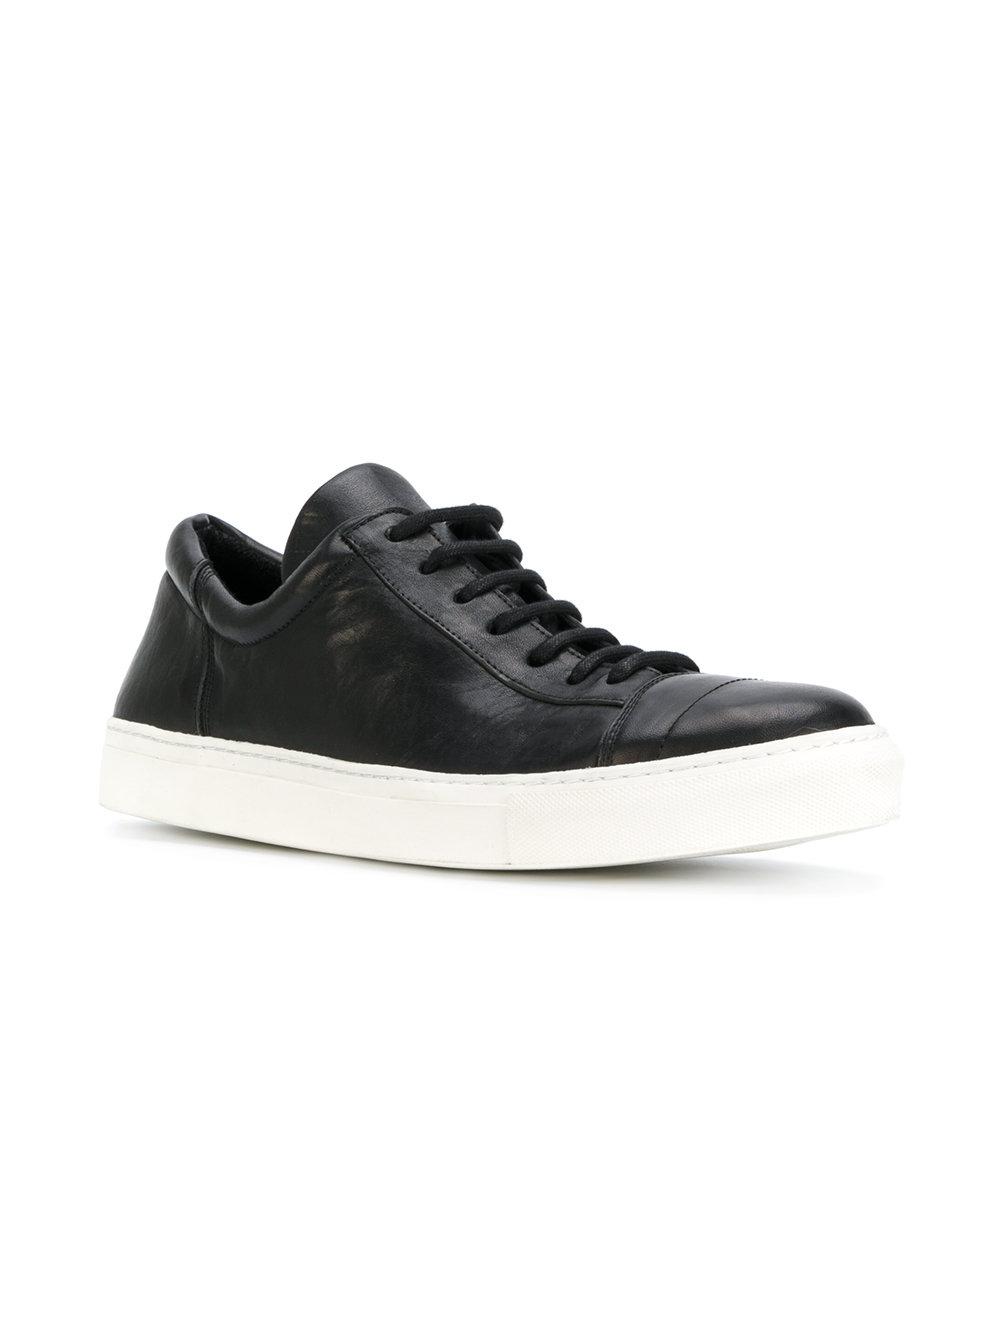 The Last Conspiracy Leather Edgar Clean Sneakers in Black for Men - Lyst